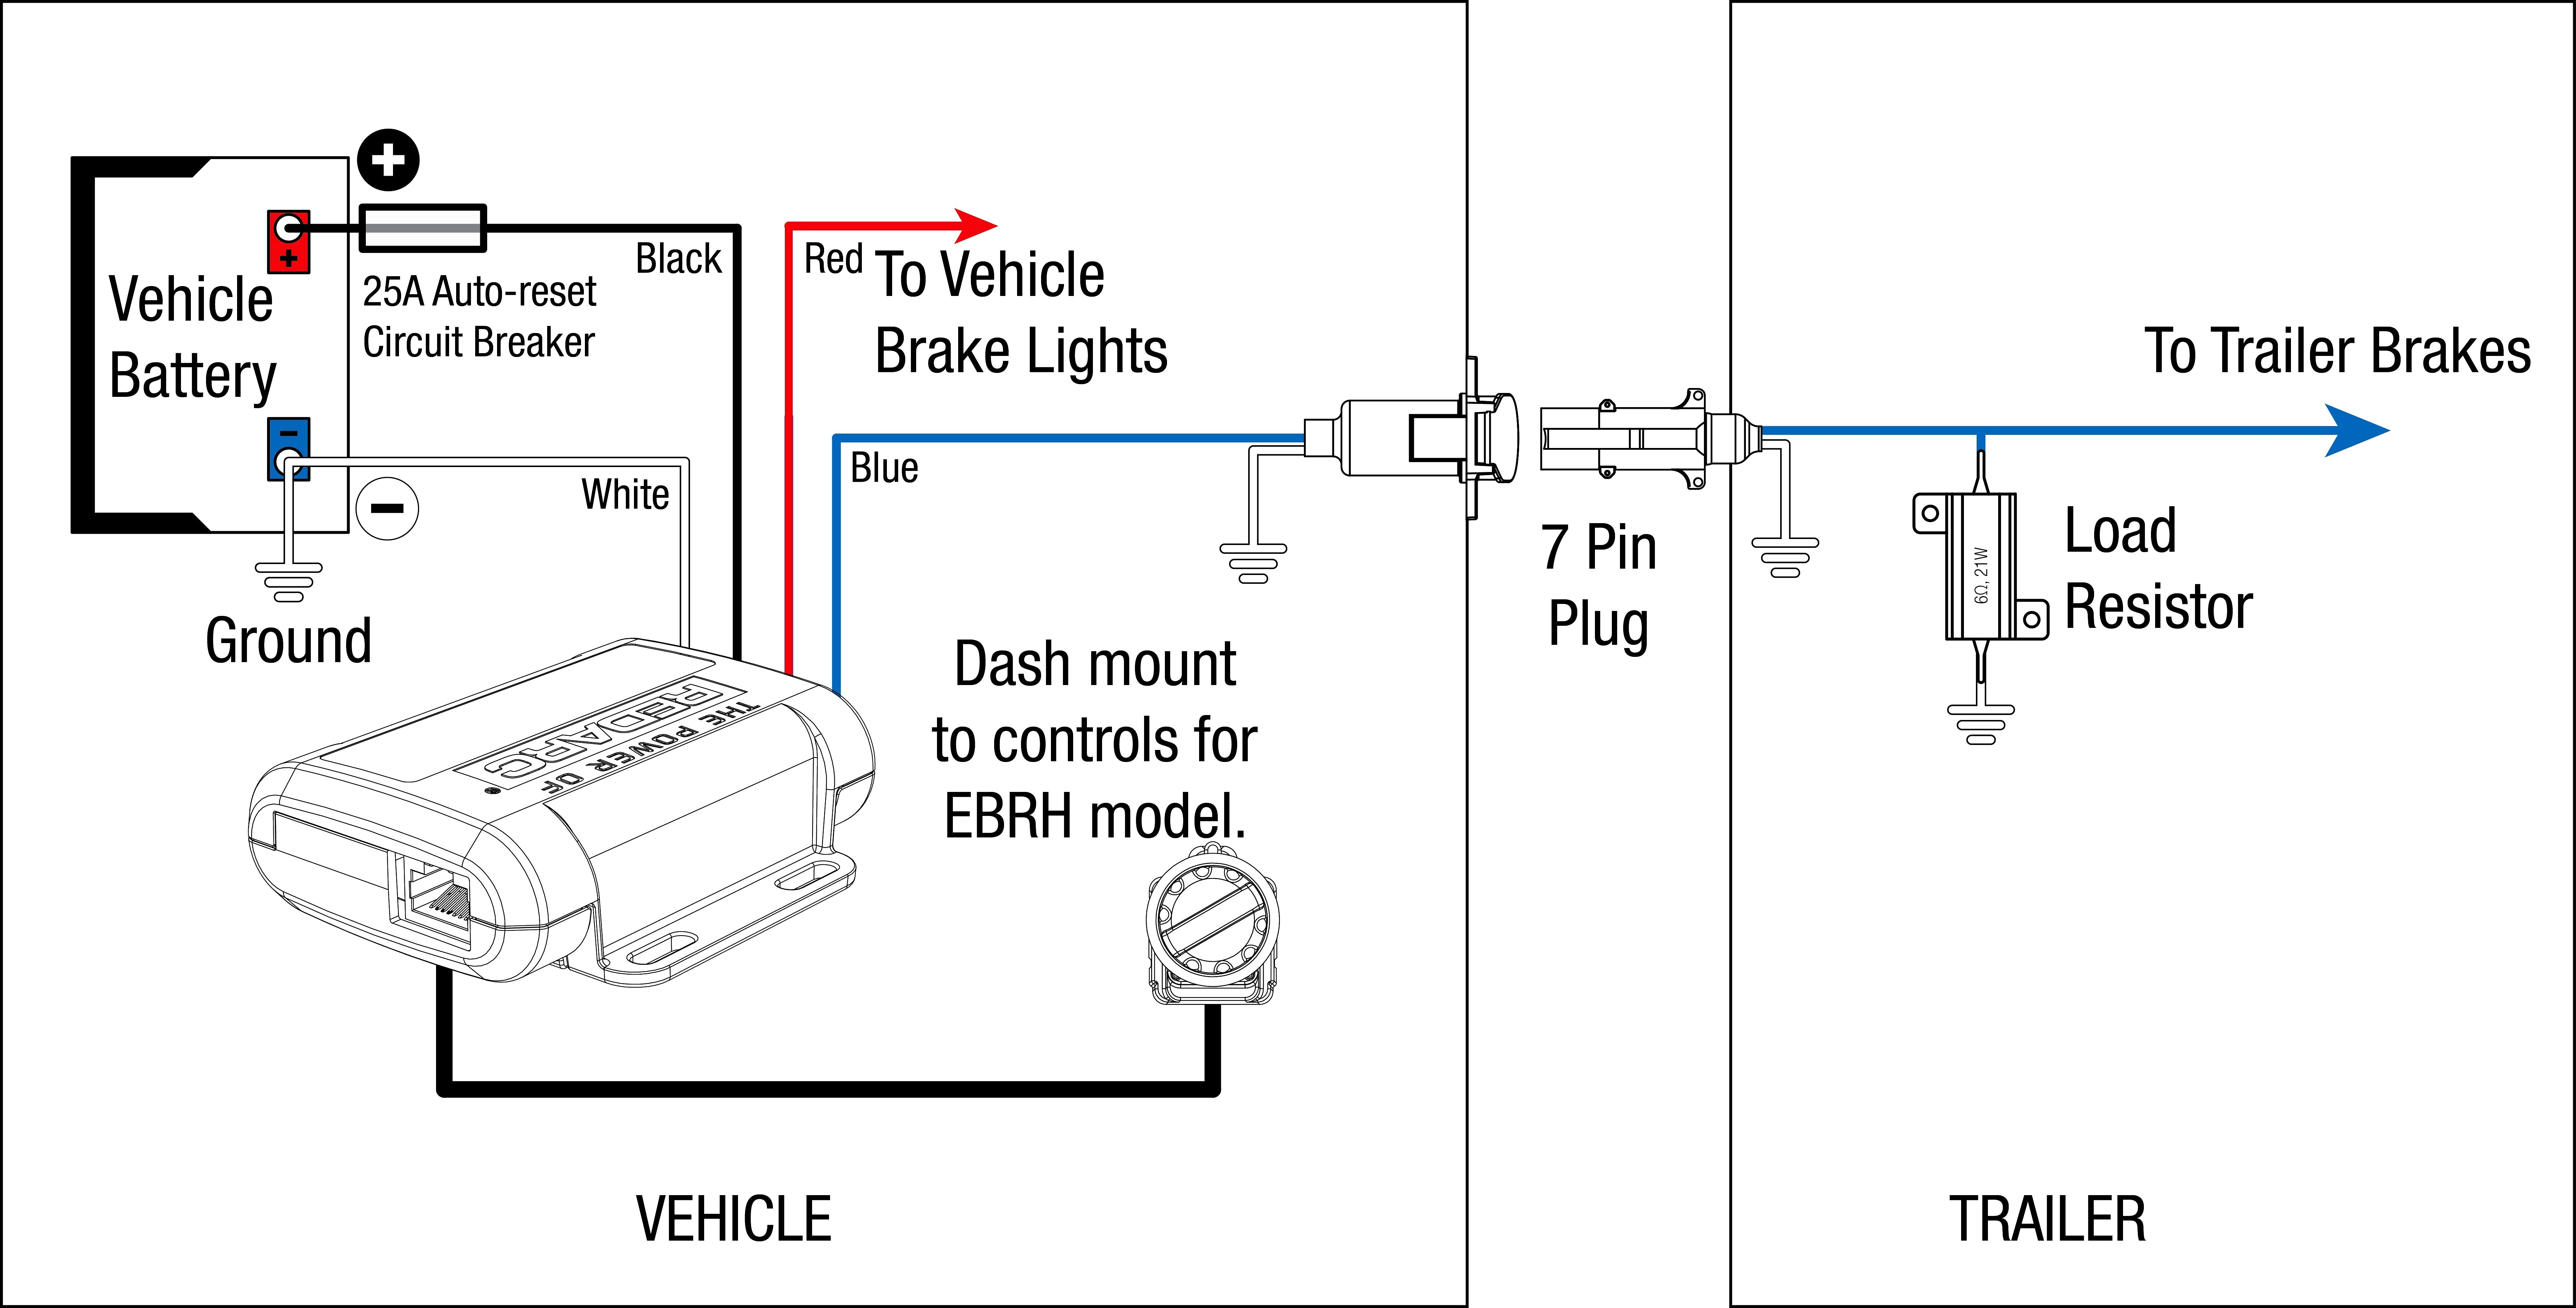 Exciting Trailer Brake Controller Wiring Diagram s And For